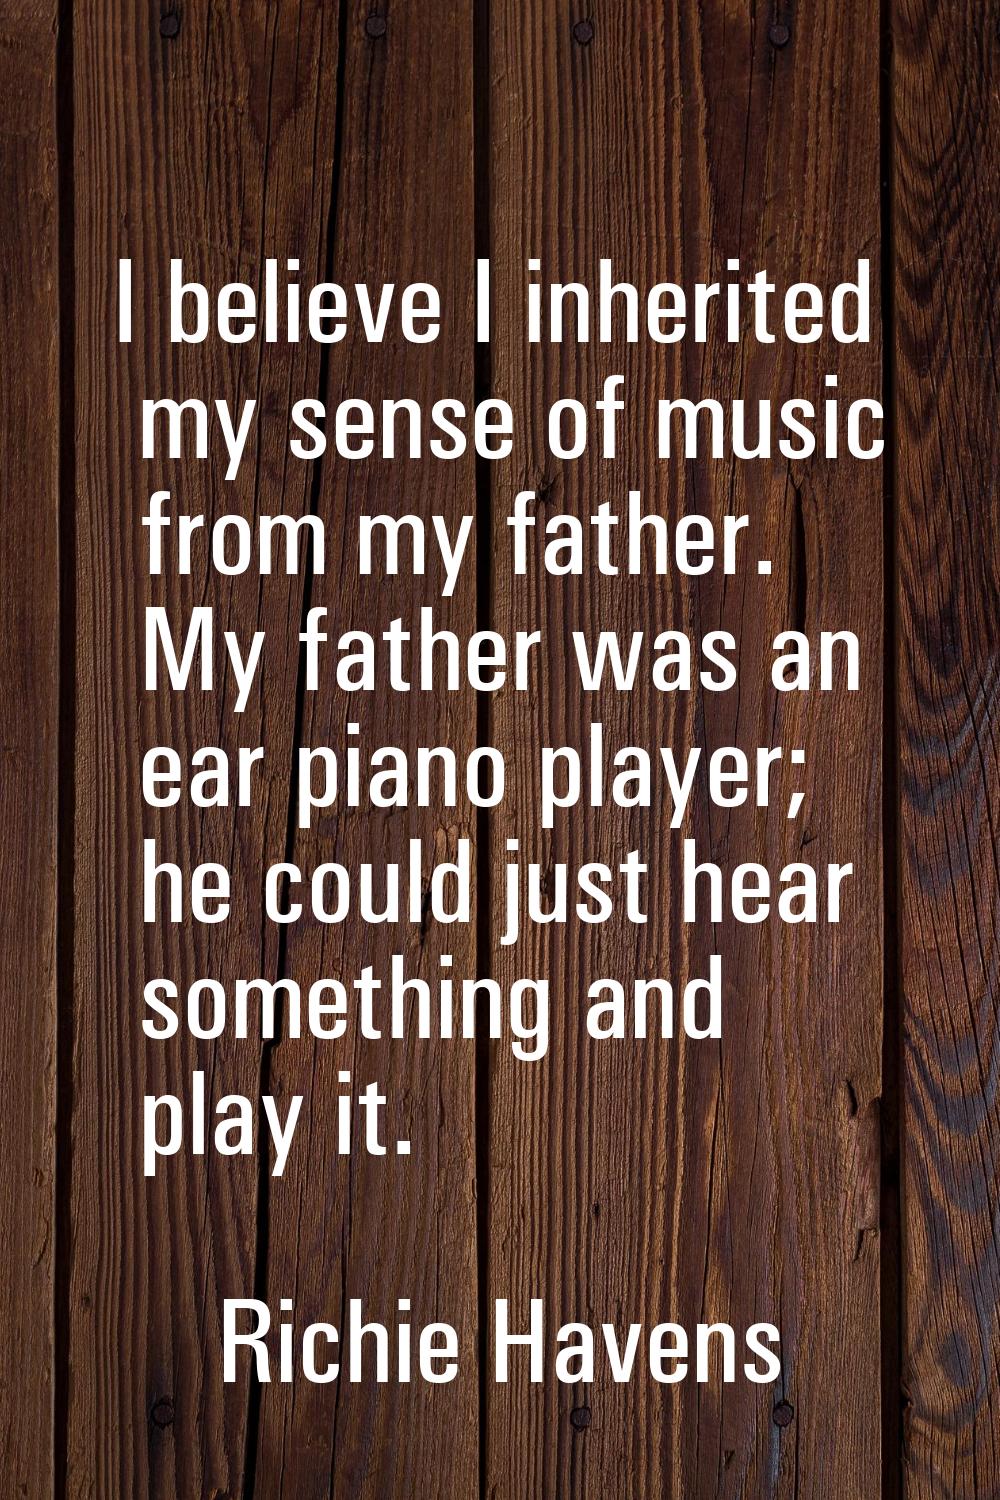 I believe I inherited my sense of music from my father. My father was an ear piano player; he could